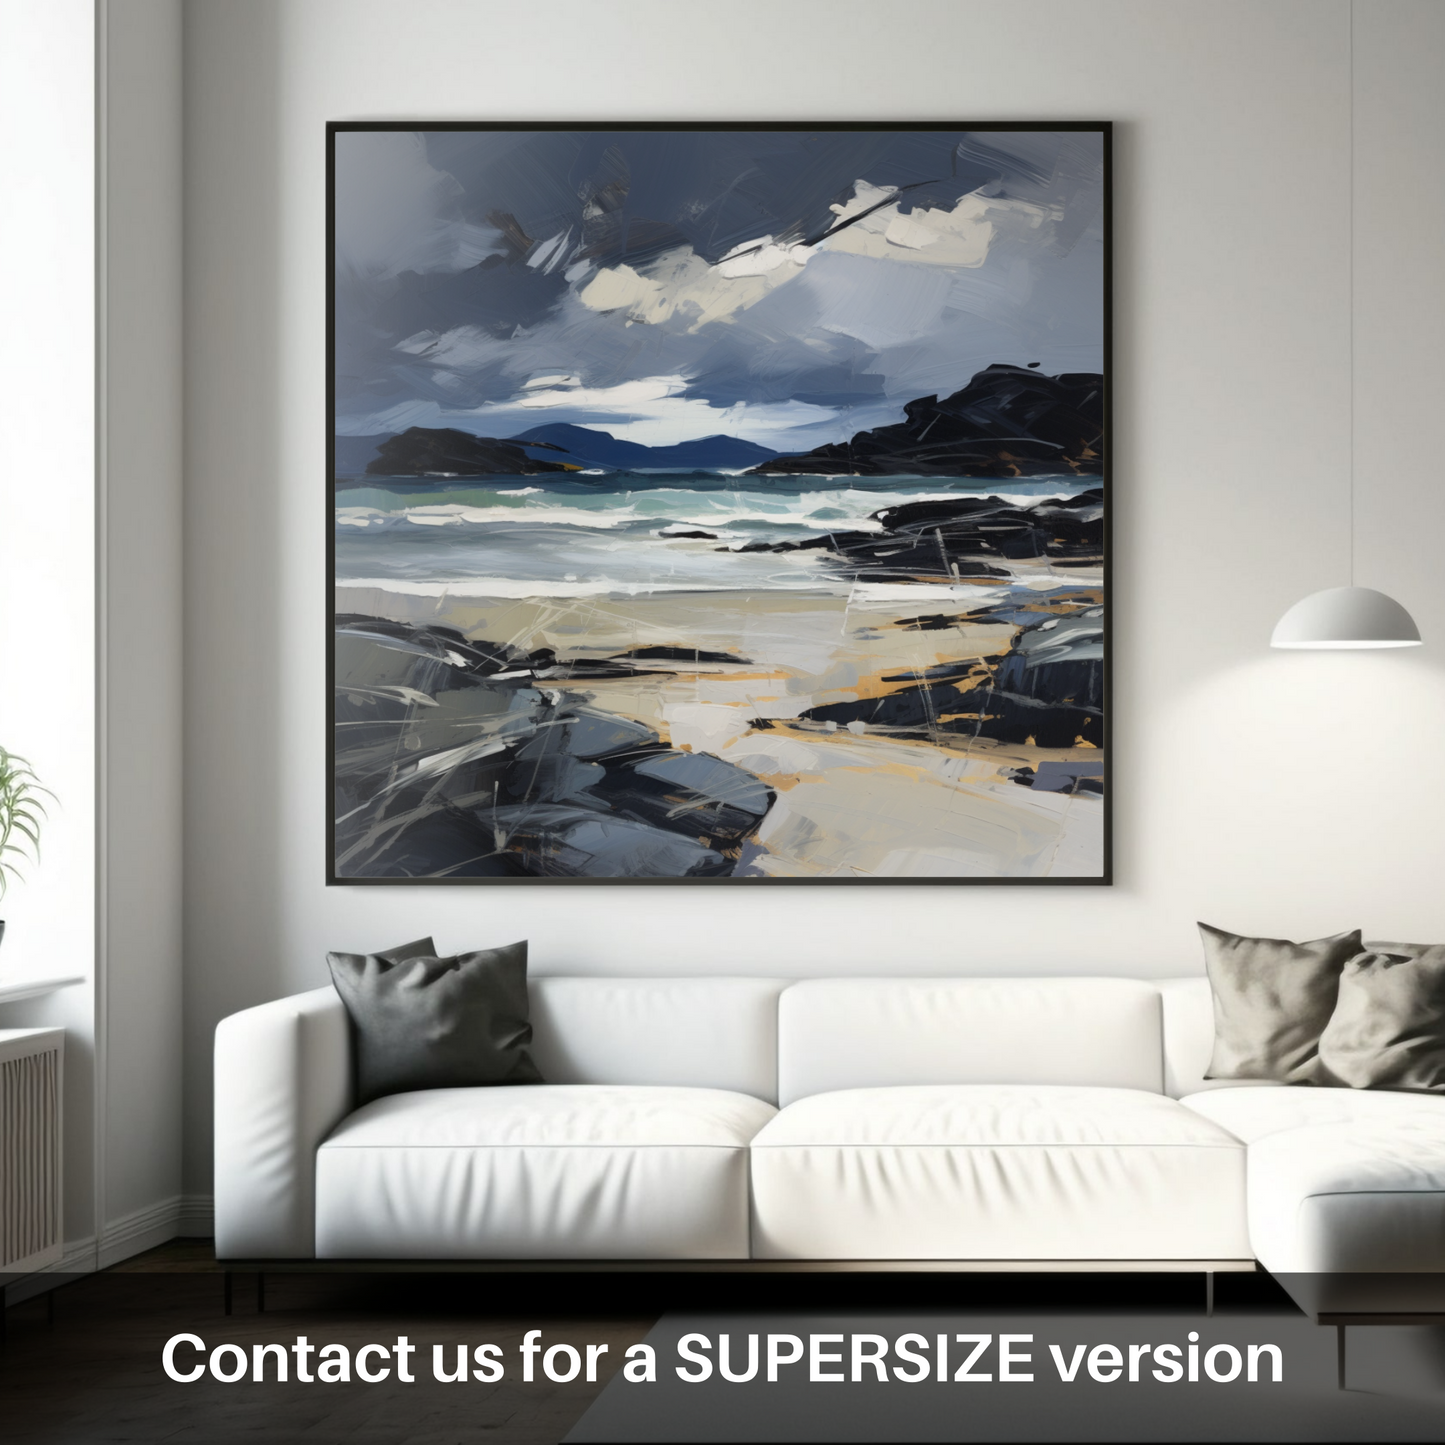 Huge supersize print of Mellon Udrigle Beach with a stormy sky